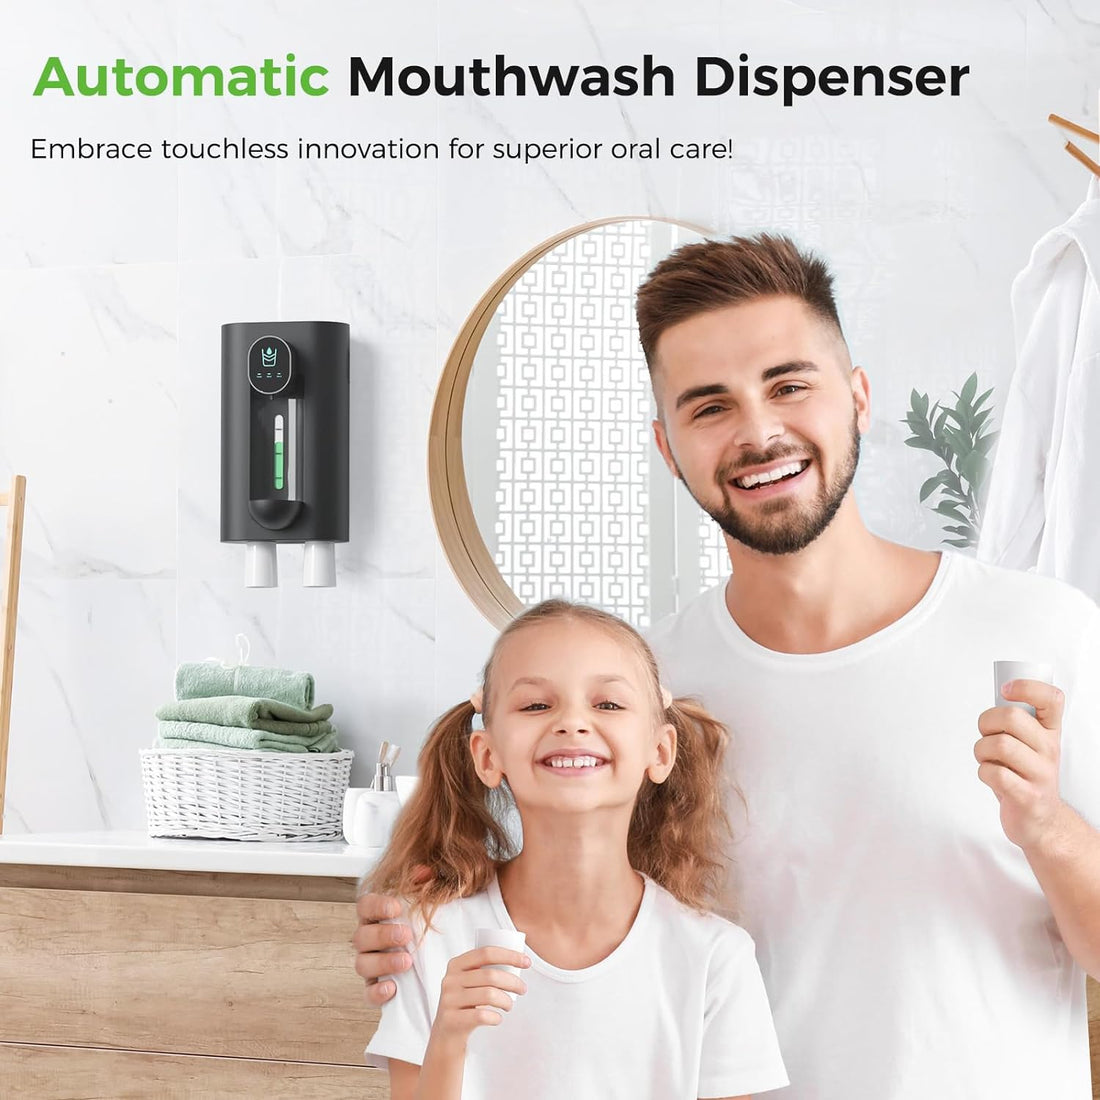 Automatic Mouthwash Dispenser 18.26 oz Touchless Mouthwash Dispenser for Bathroom 2 Magnetic Cup USB Rechargeable and 3 Dispensing Levels with Led Screen Wall-Mounted or Countertop Use-Black